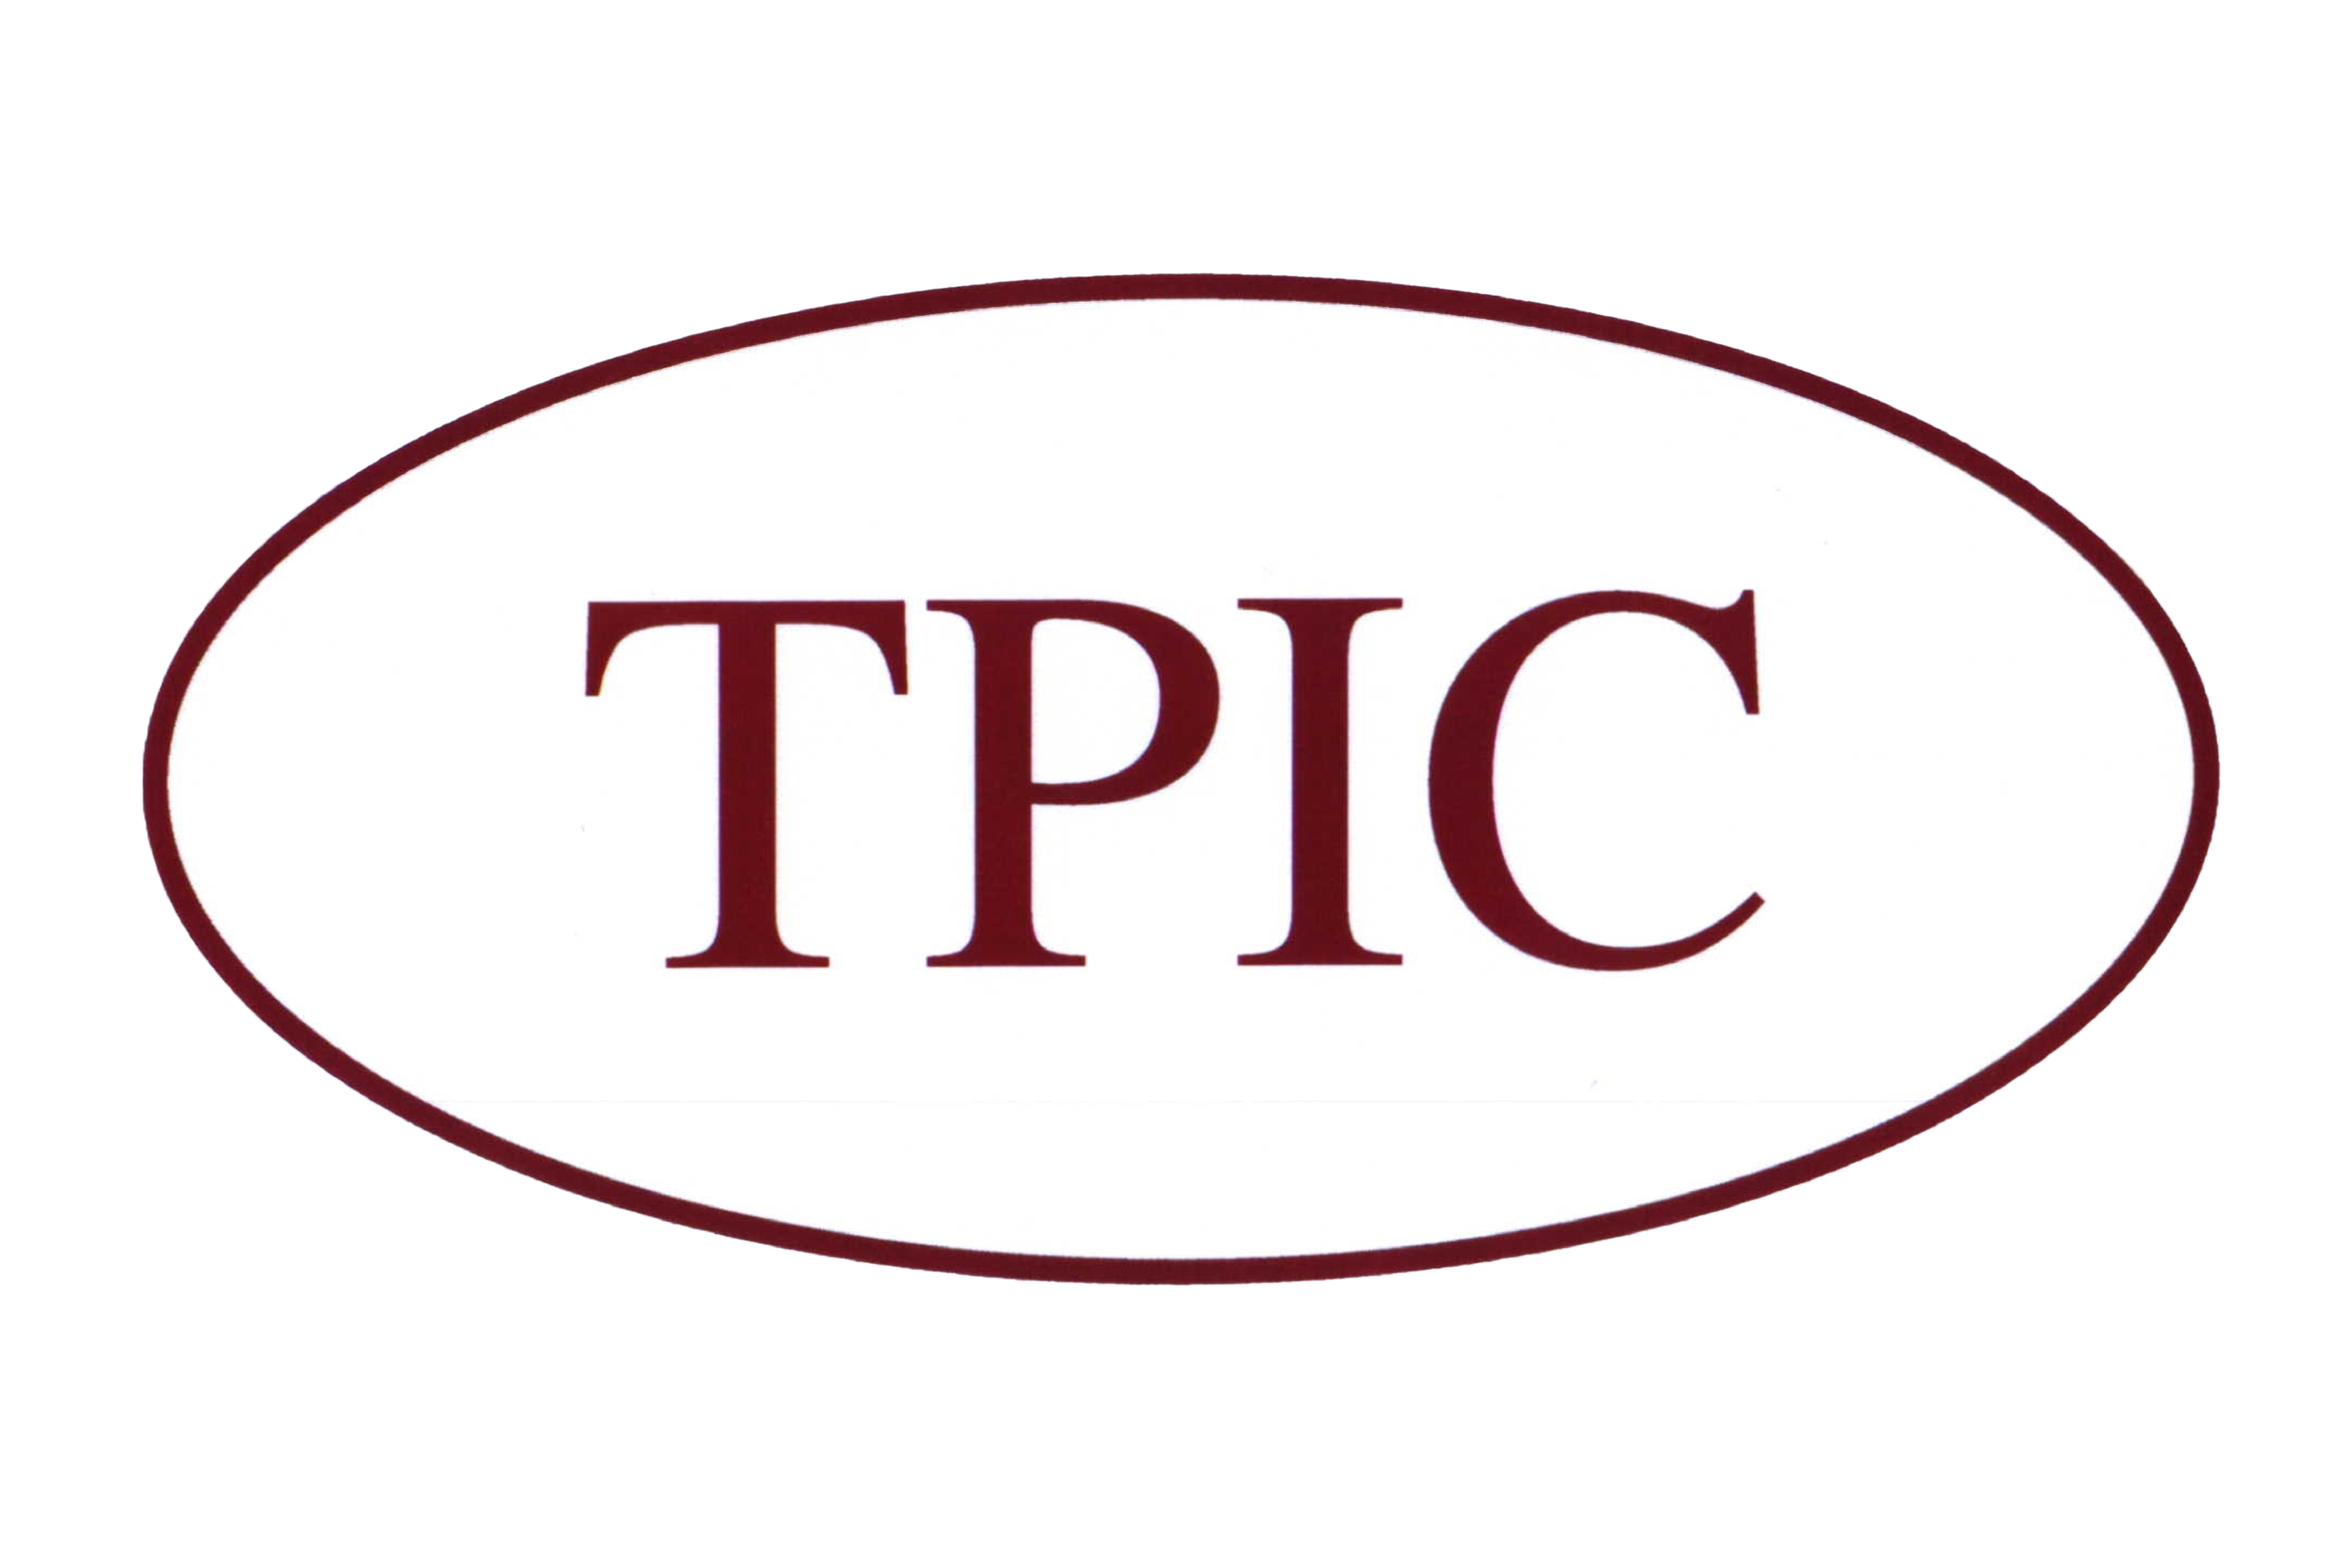 TPIC - Texas Petroleum Investment Company